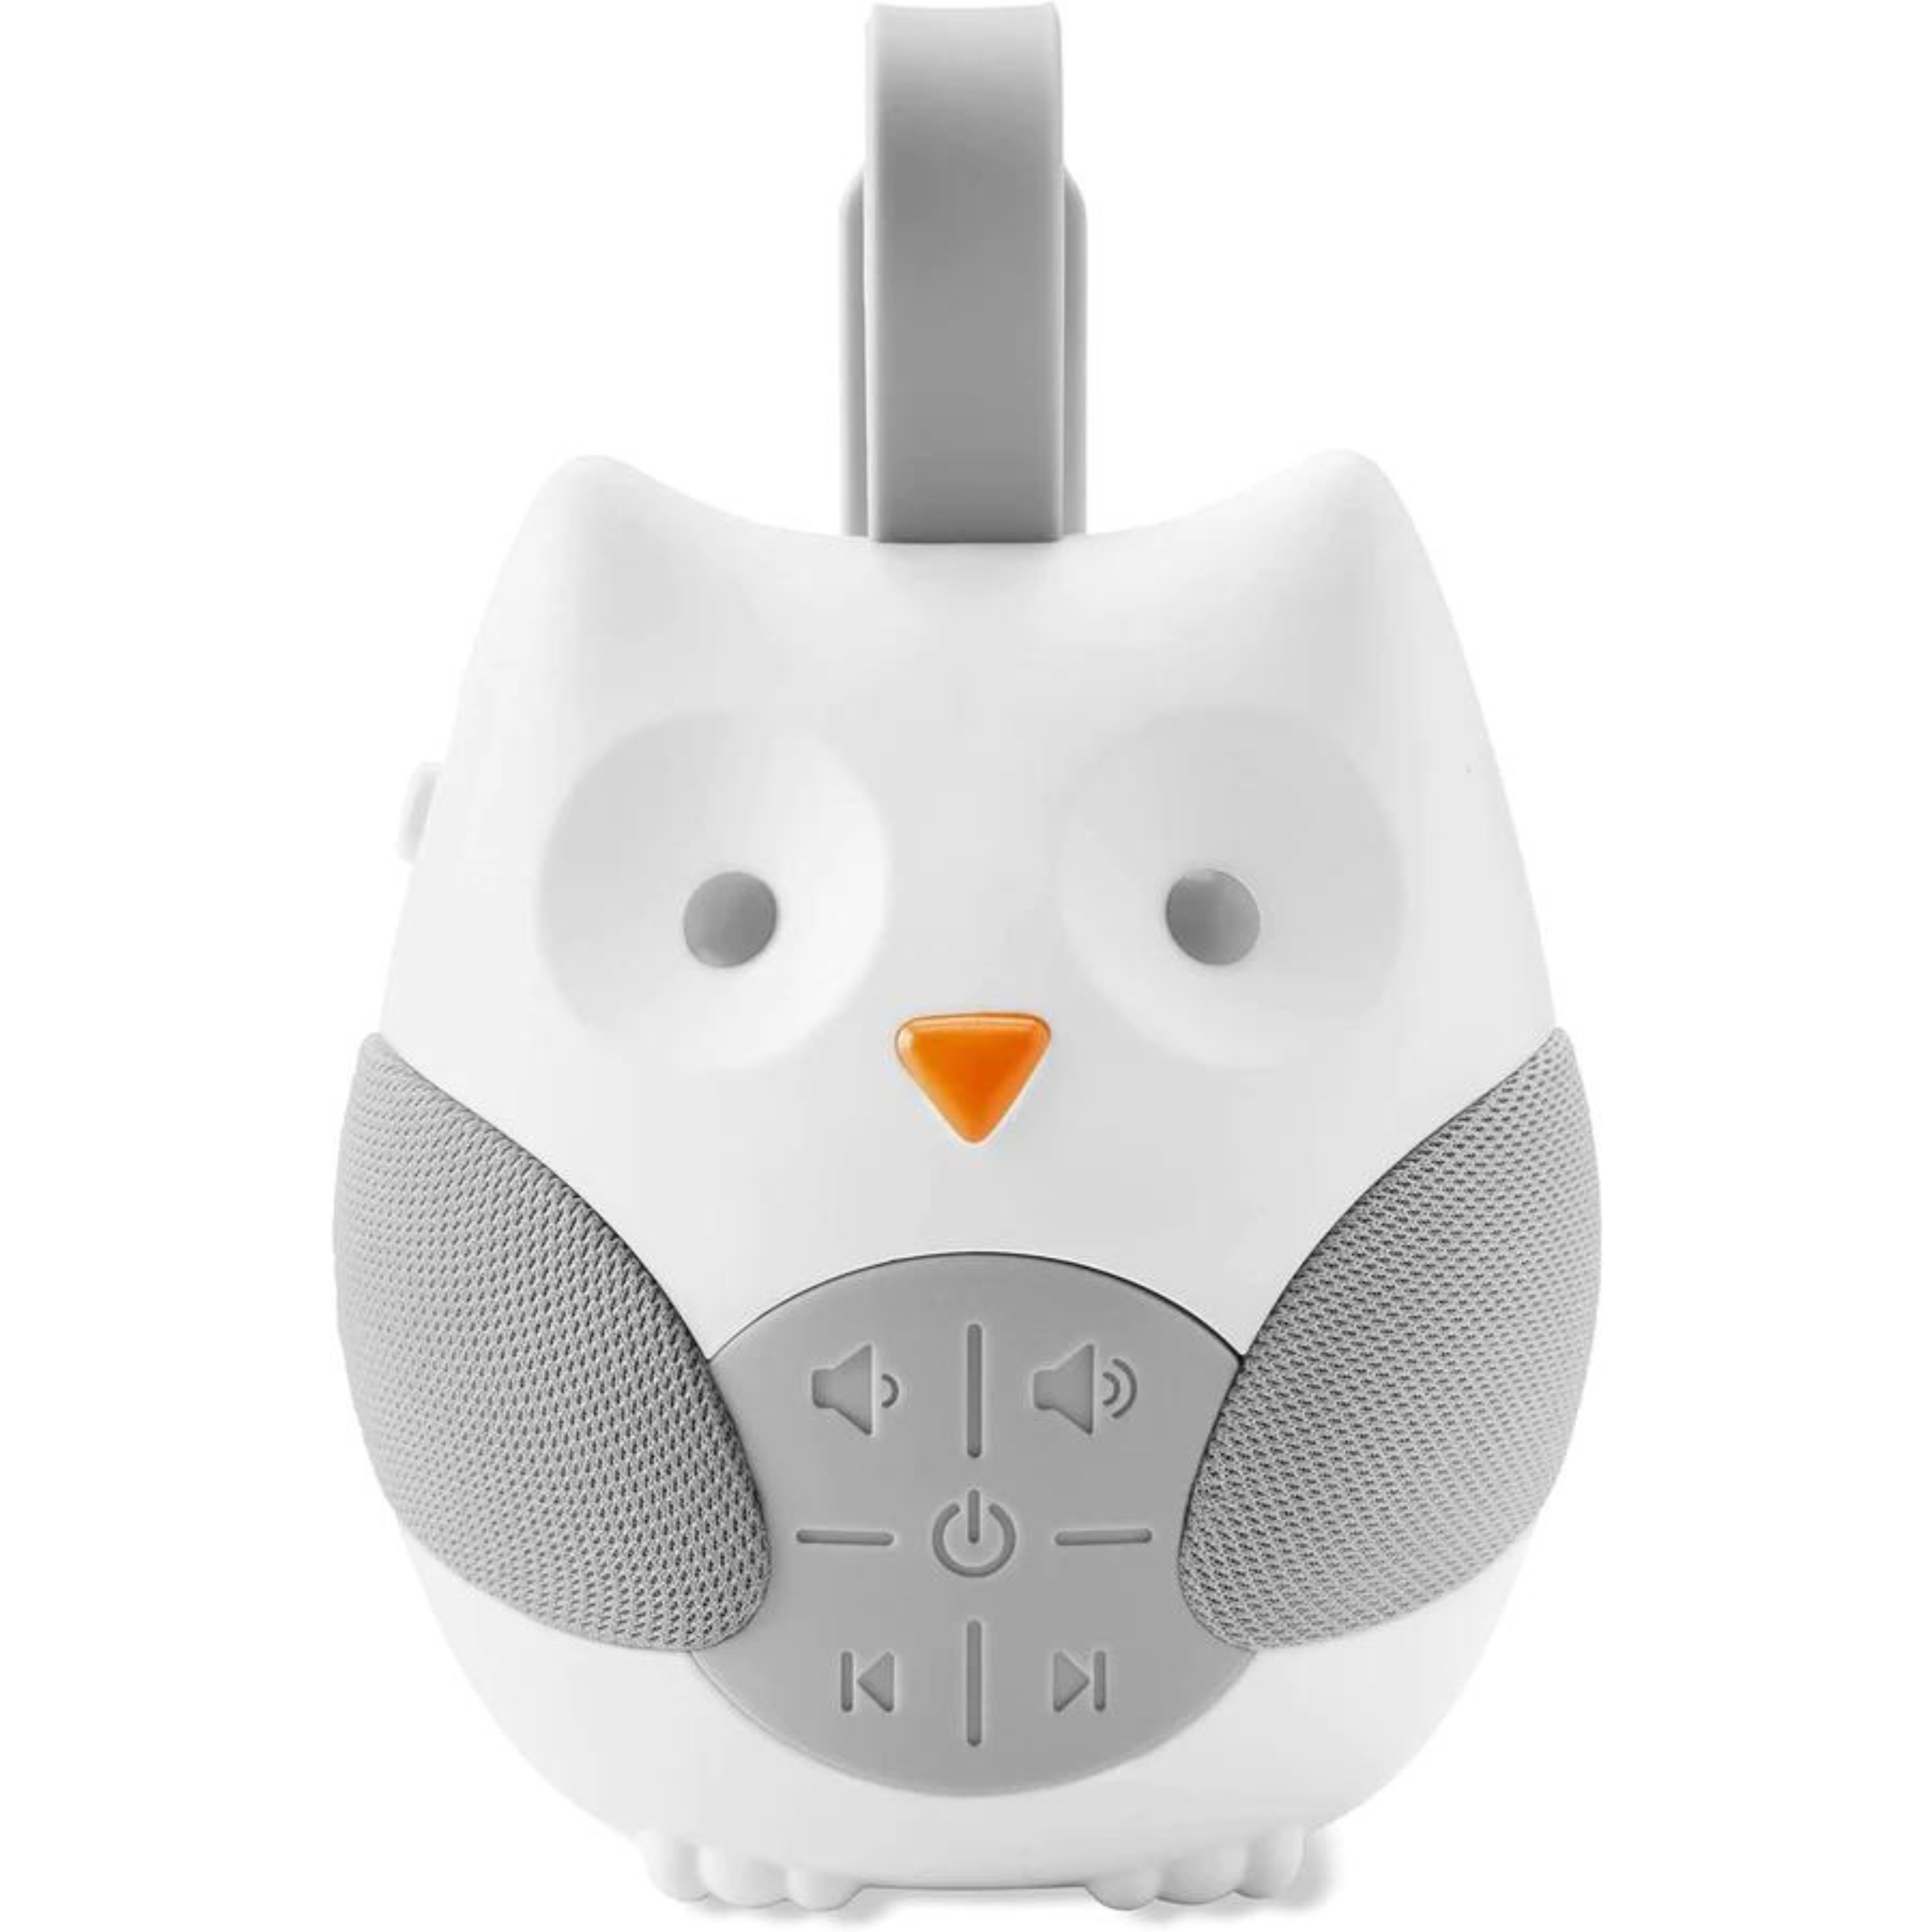 Arabest Baby Sound Machine - Portable White Noise Machine for Baby Sleeping,Moonlight & Melodies Nightlight Soother,Owl